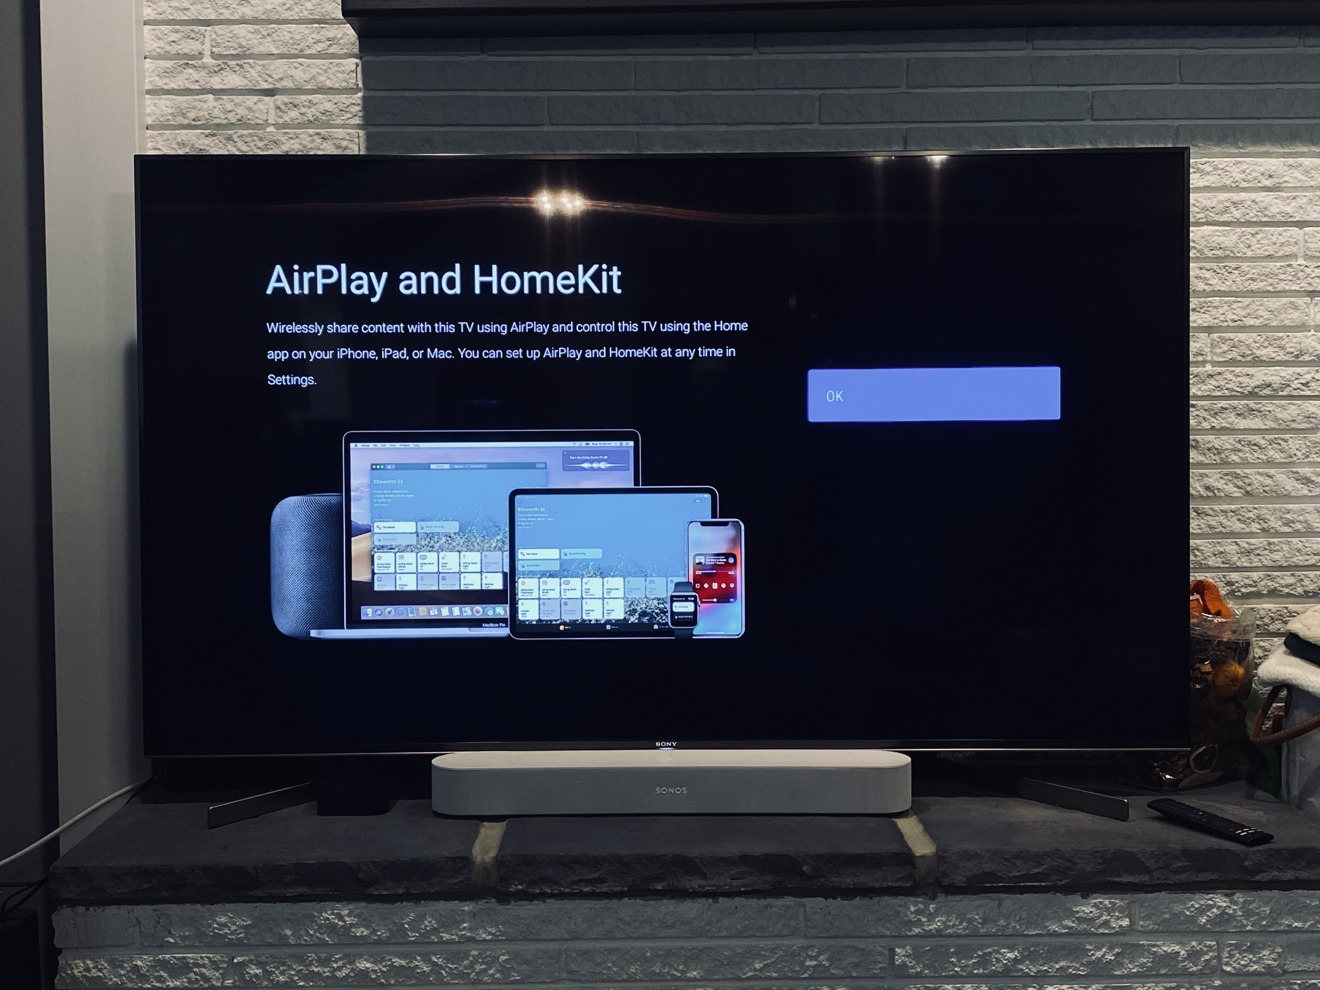 Hot And Airplay 2 On Sony Smart Tvs, How To Mirror Ipad Sony Tv Wirelessly